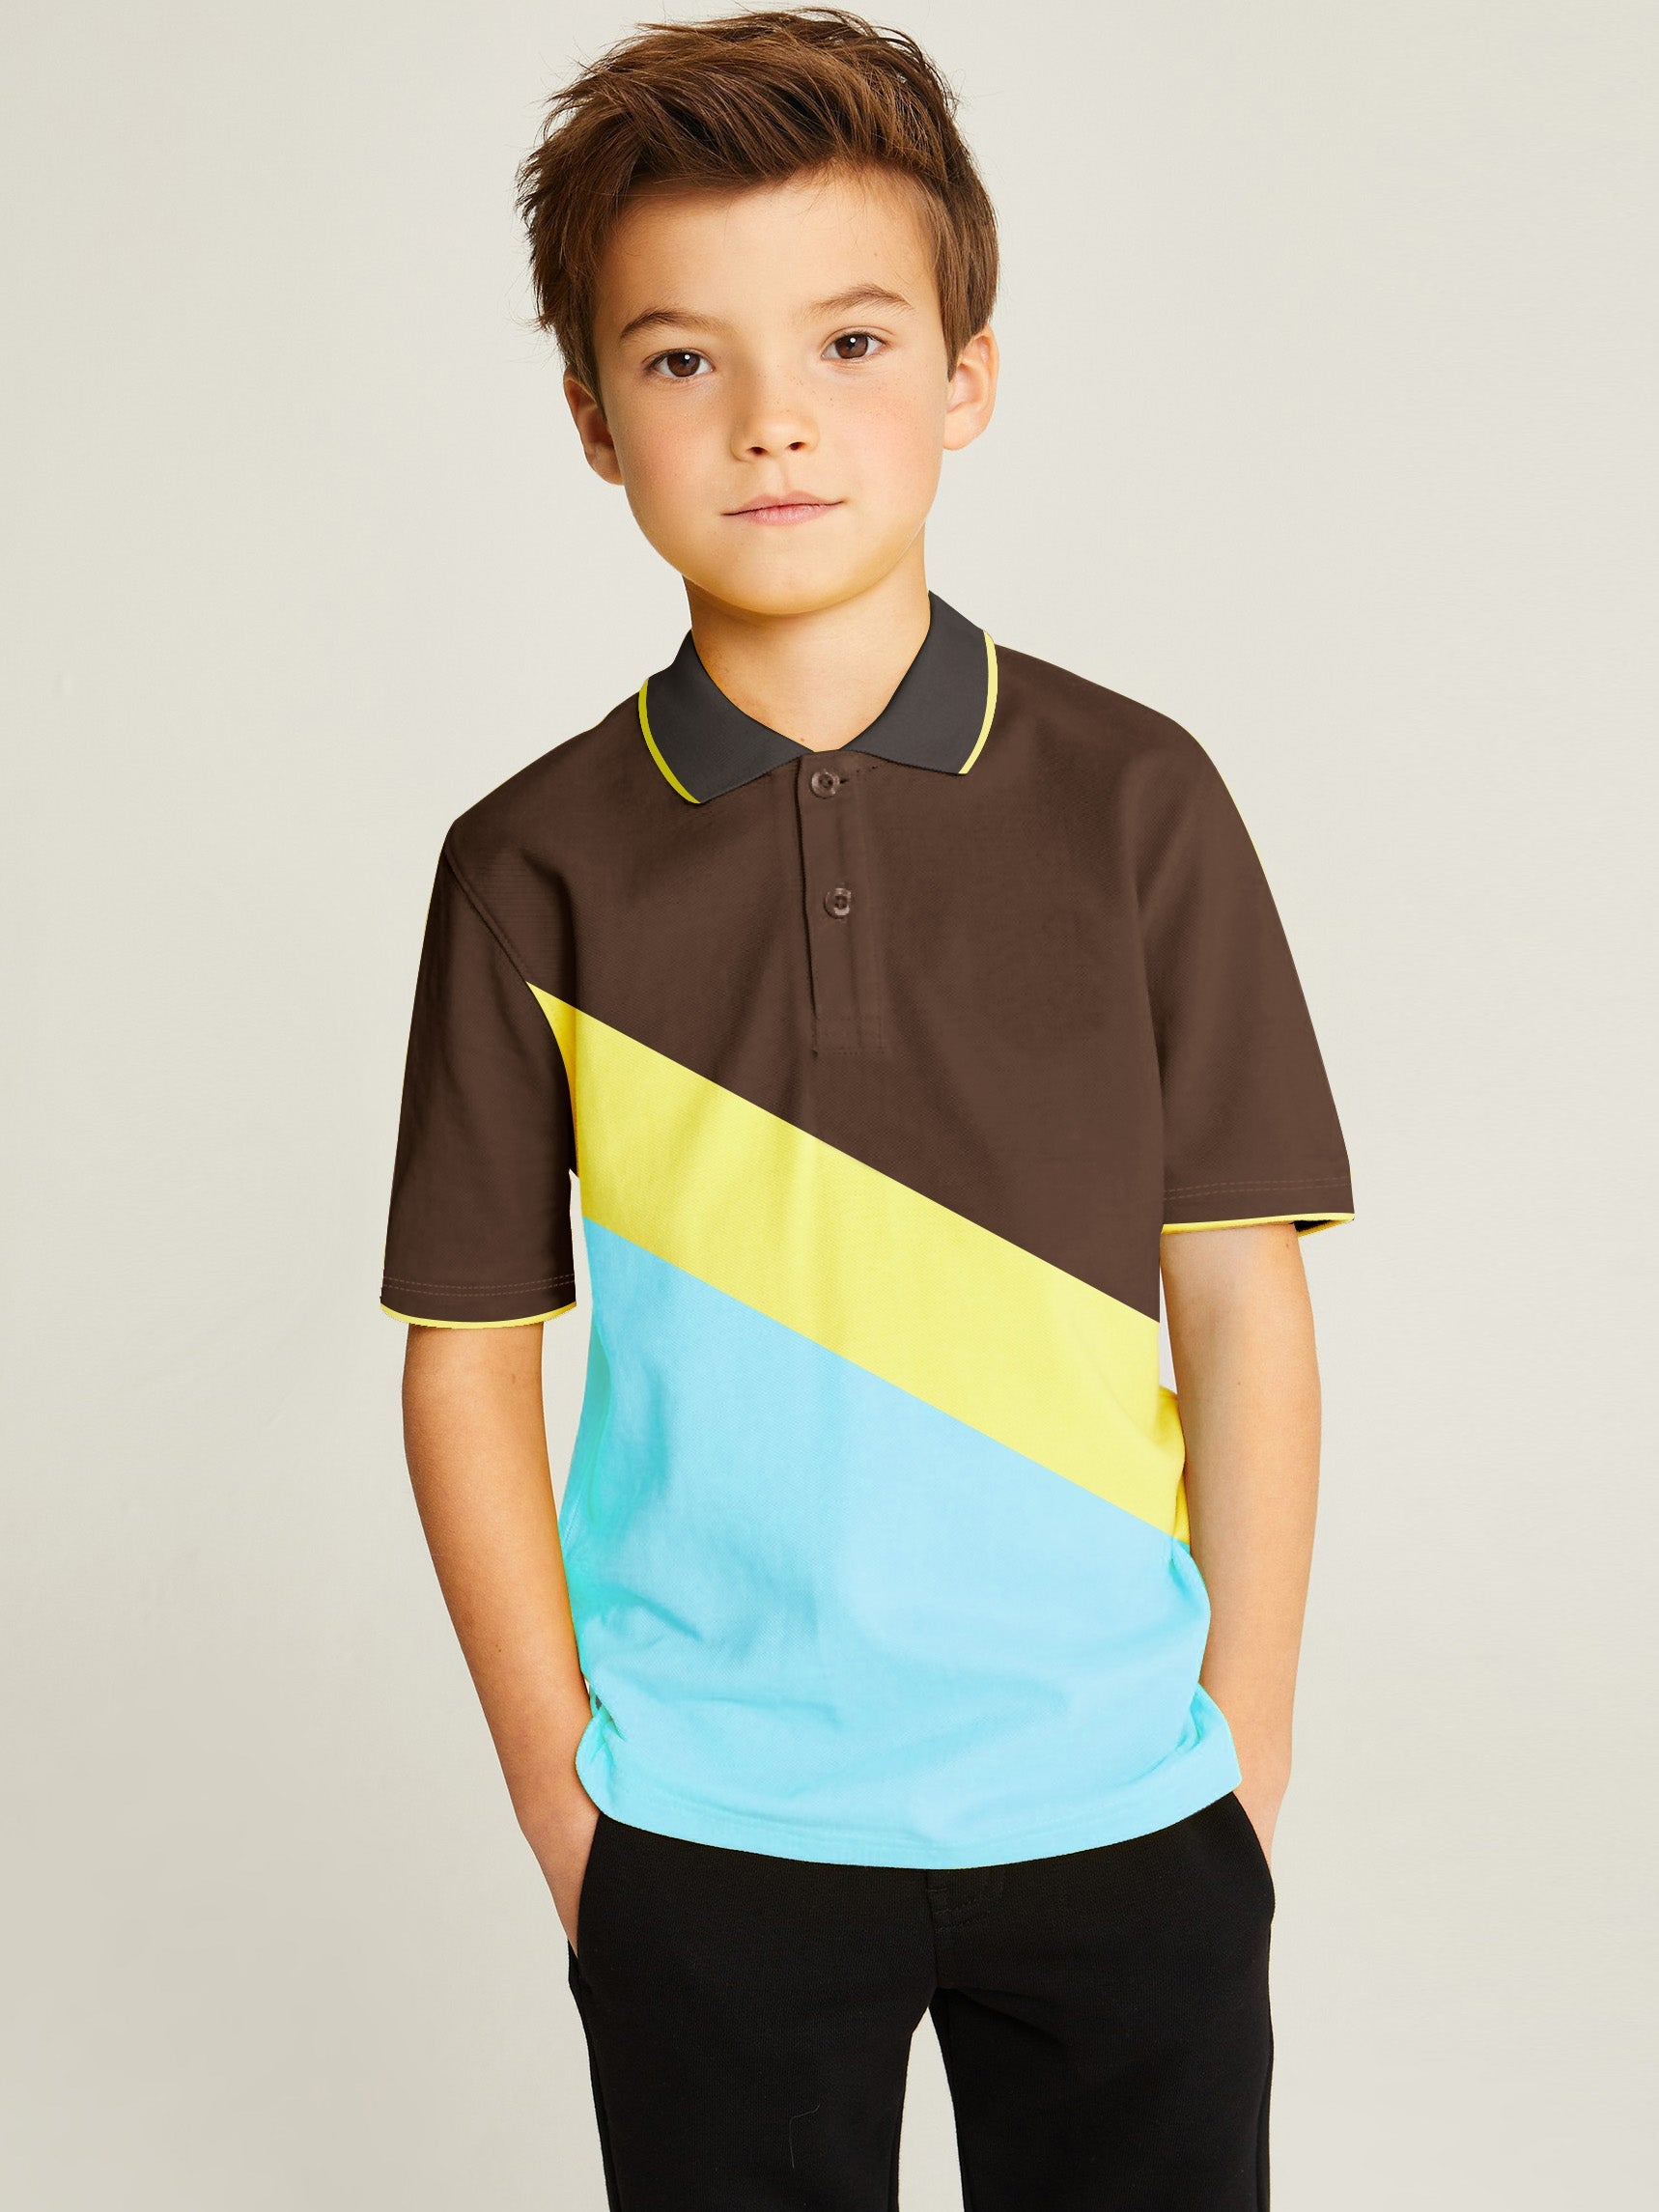 Summer Panel Polo Shirt For Kids-Sky Blue with Yellow & Brown-SP1700/RT2410